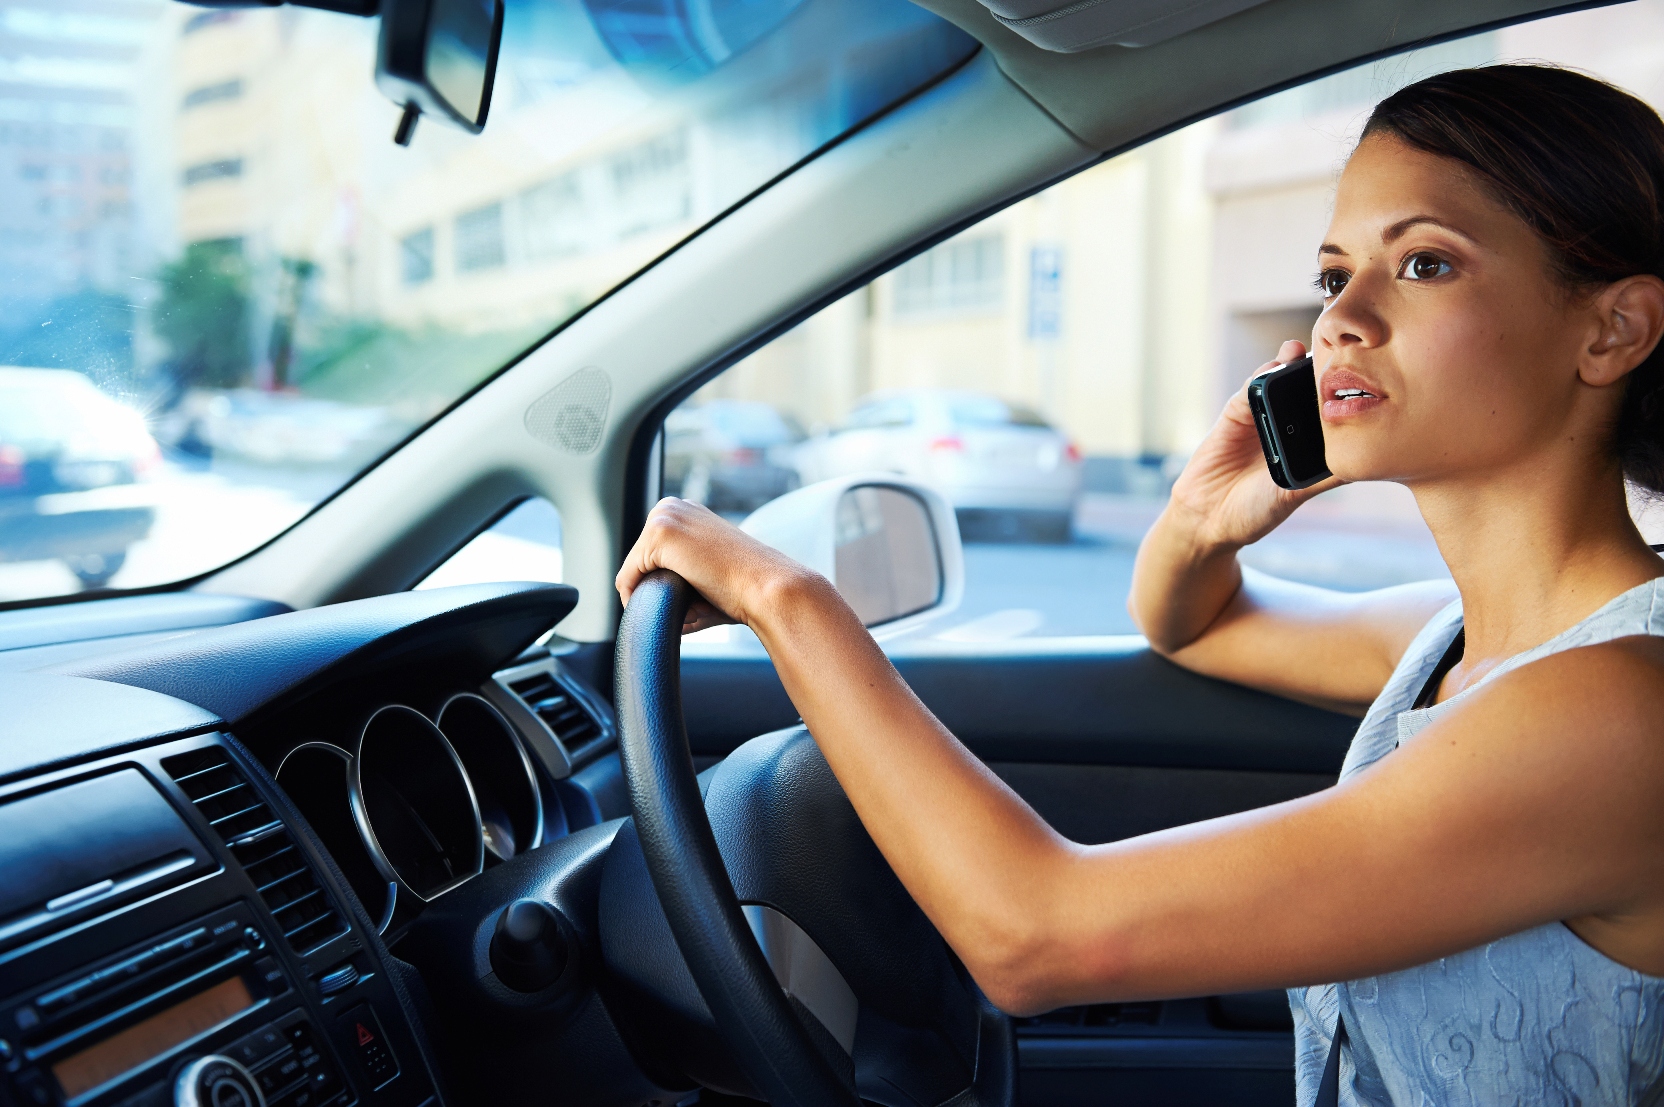 Stock image of a woman talking on a cell phone while driving